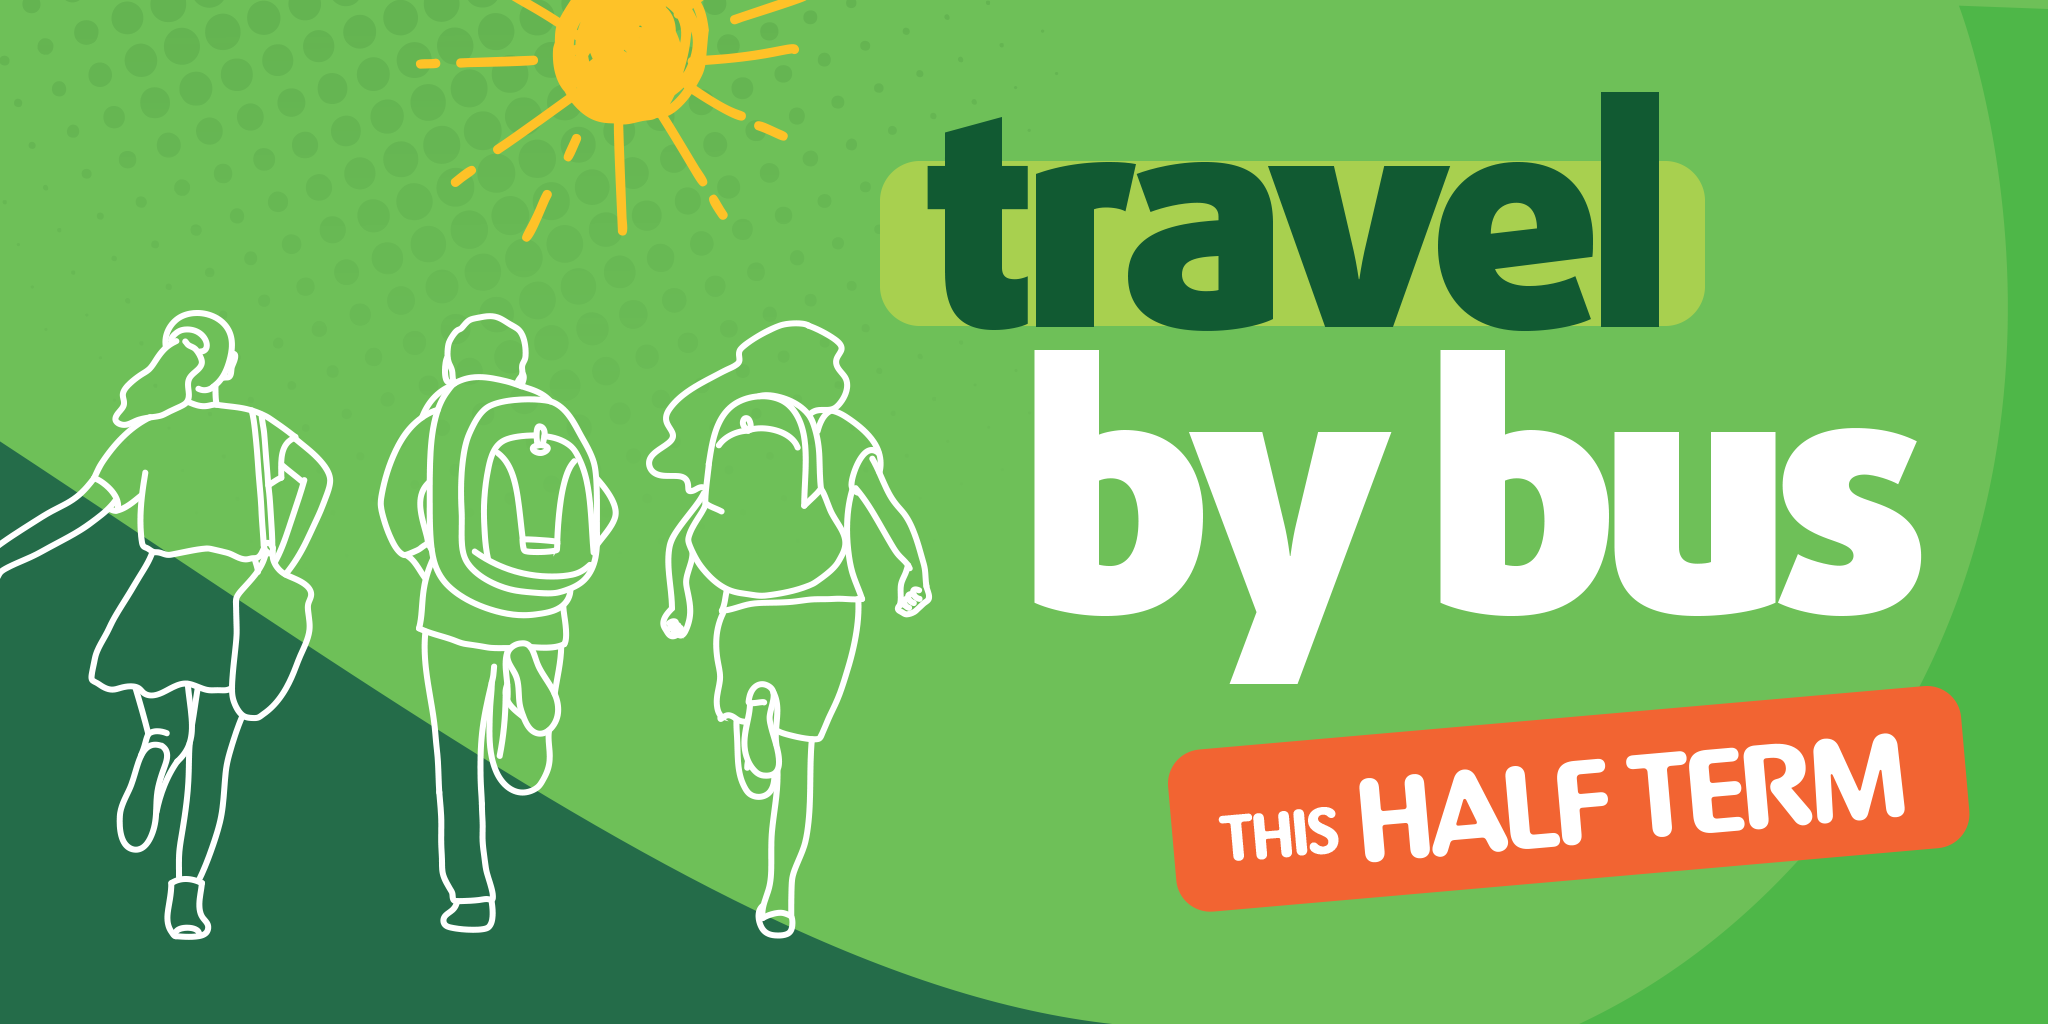 travel by bus this half term